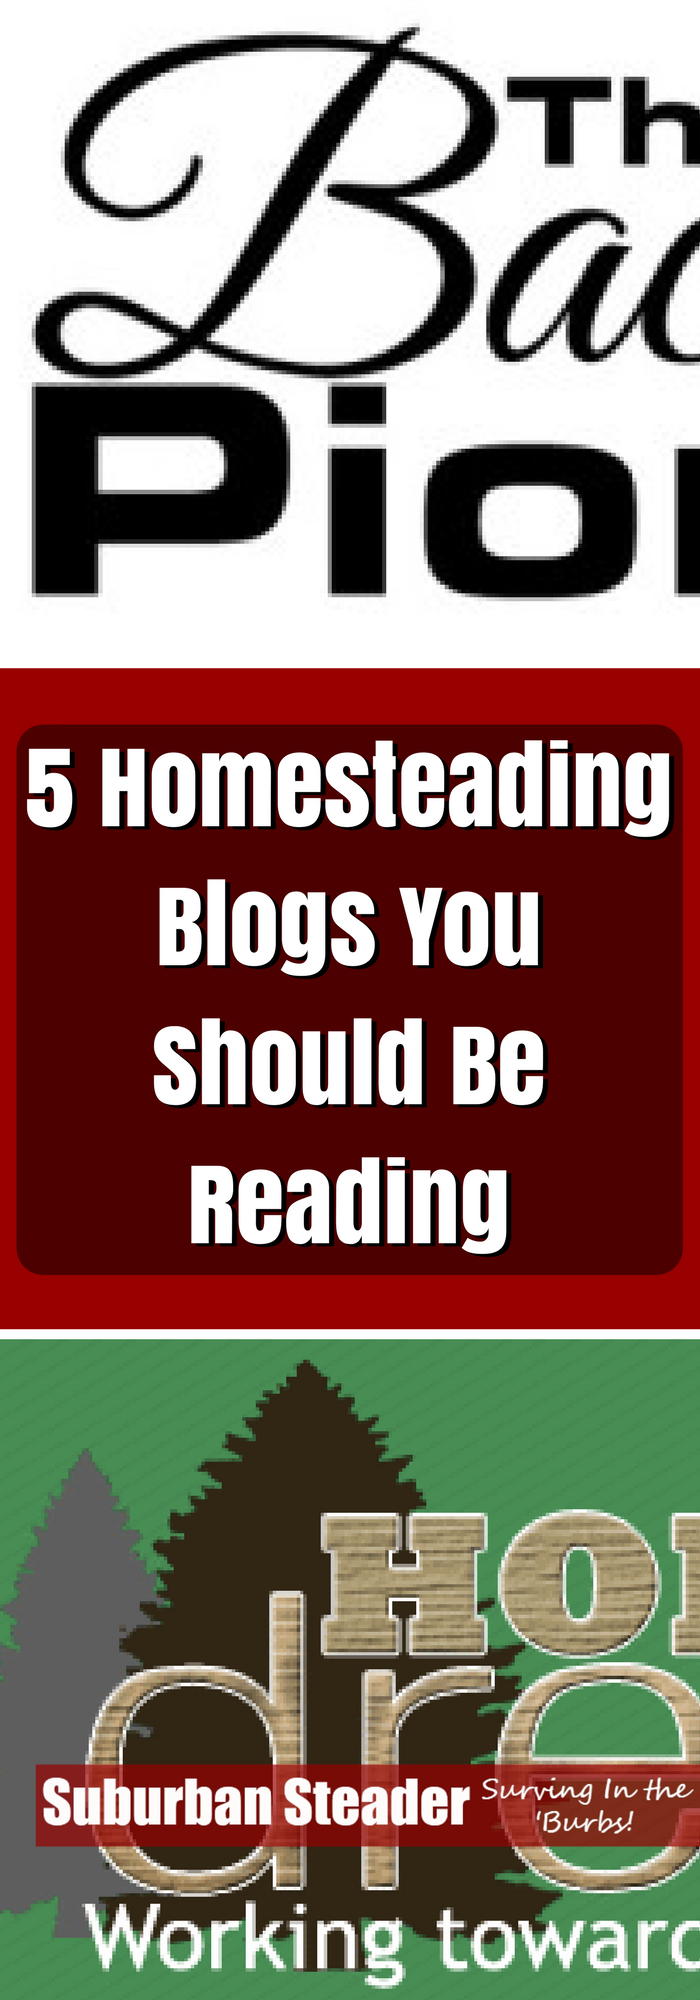 5 Homestead Blogs You Should Be Reading